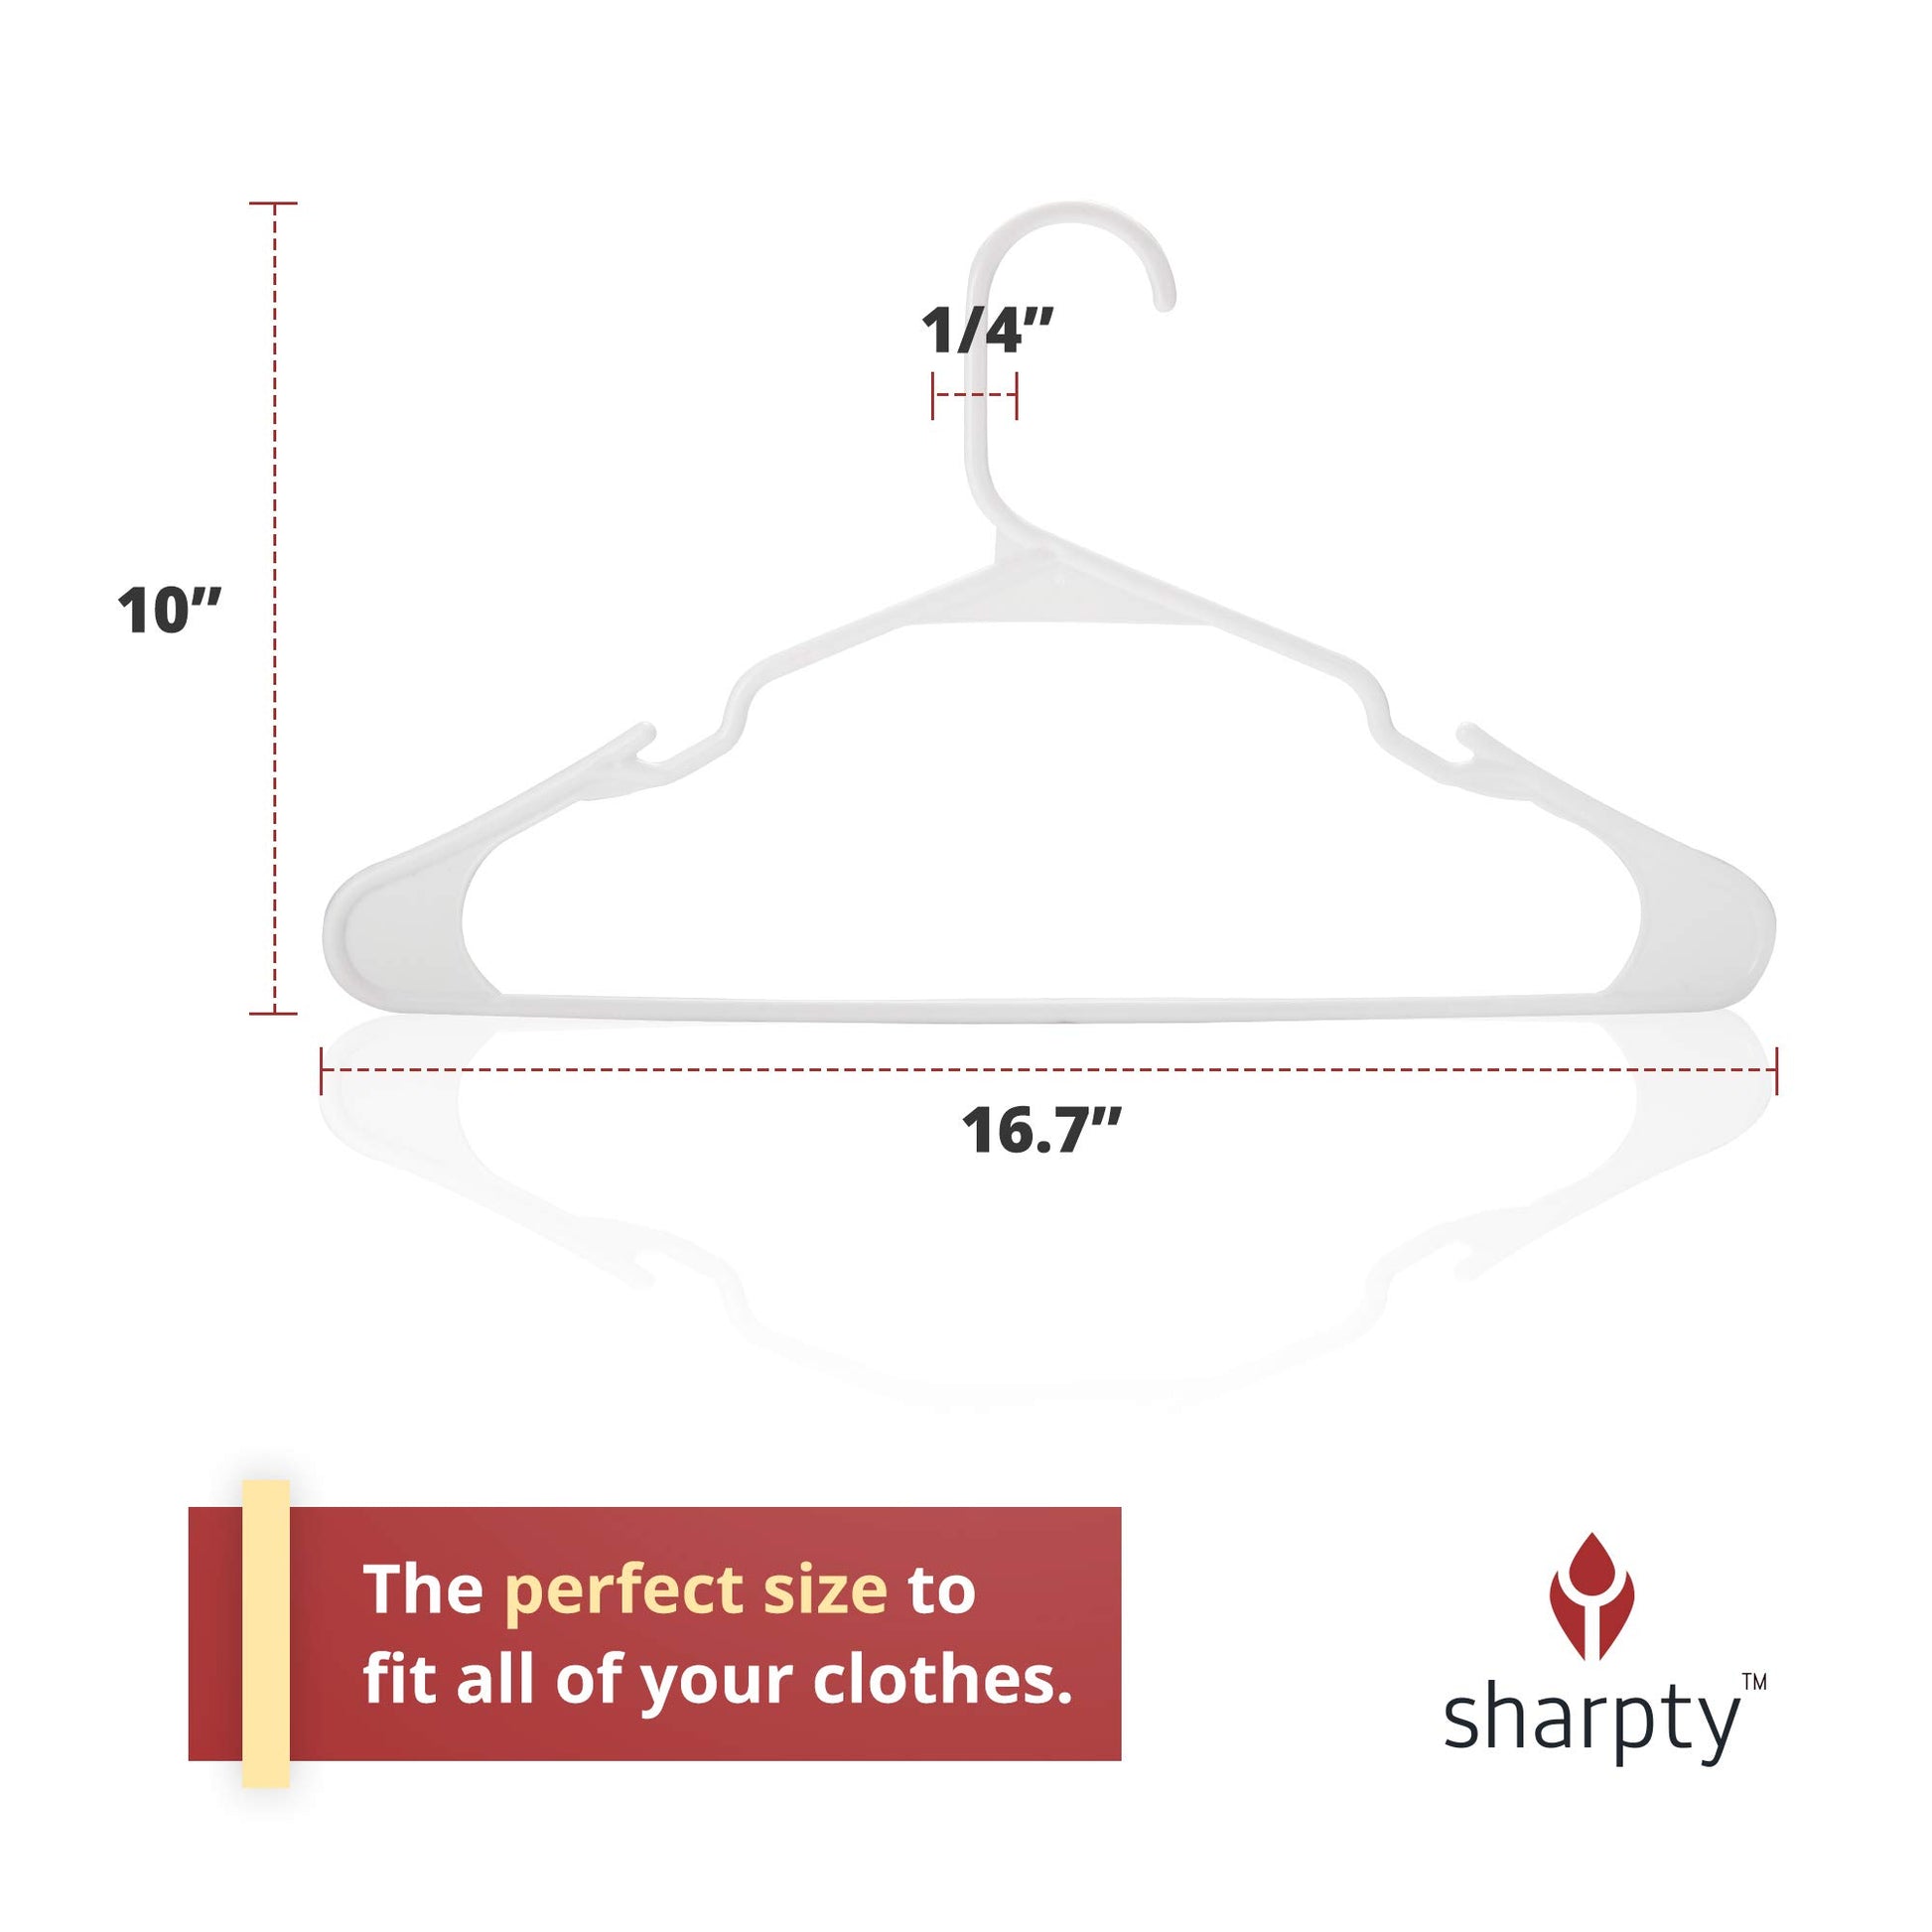  Sharpty Plastic Hangers, 20-Pack, Slim, Space Saving, Heavy  Duty, Notched, Durable, Smooth, Fabric-Friendly, Ideal for Clothing, Coats,  Shirts, Ties, Belts, Accessories - Black : Home & Kitchen